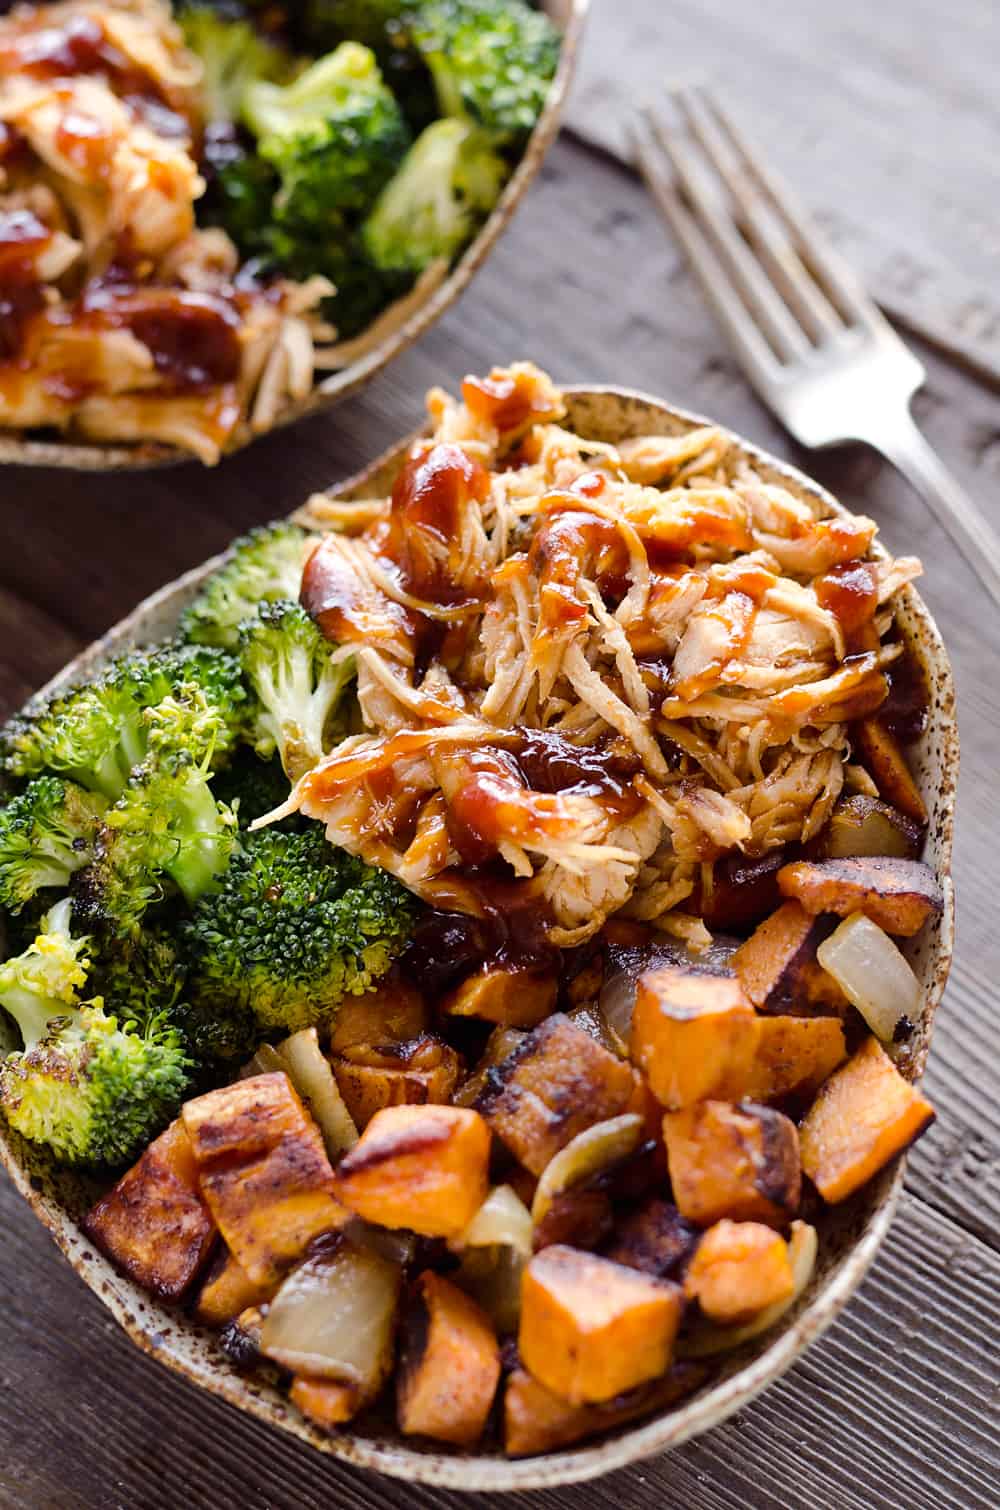 BBQ Chicken & Roasted Sweet Potato Bowls are a hearty and healthy dinner idea bursting with bold flavors and nutritious vegetables. This easy recipe is perfect for meal prepping lunches for work or a quick weeknight meal. 